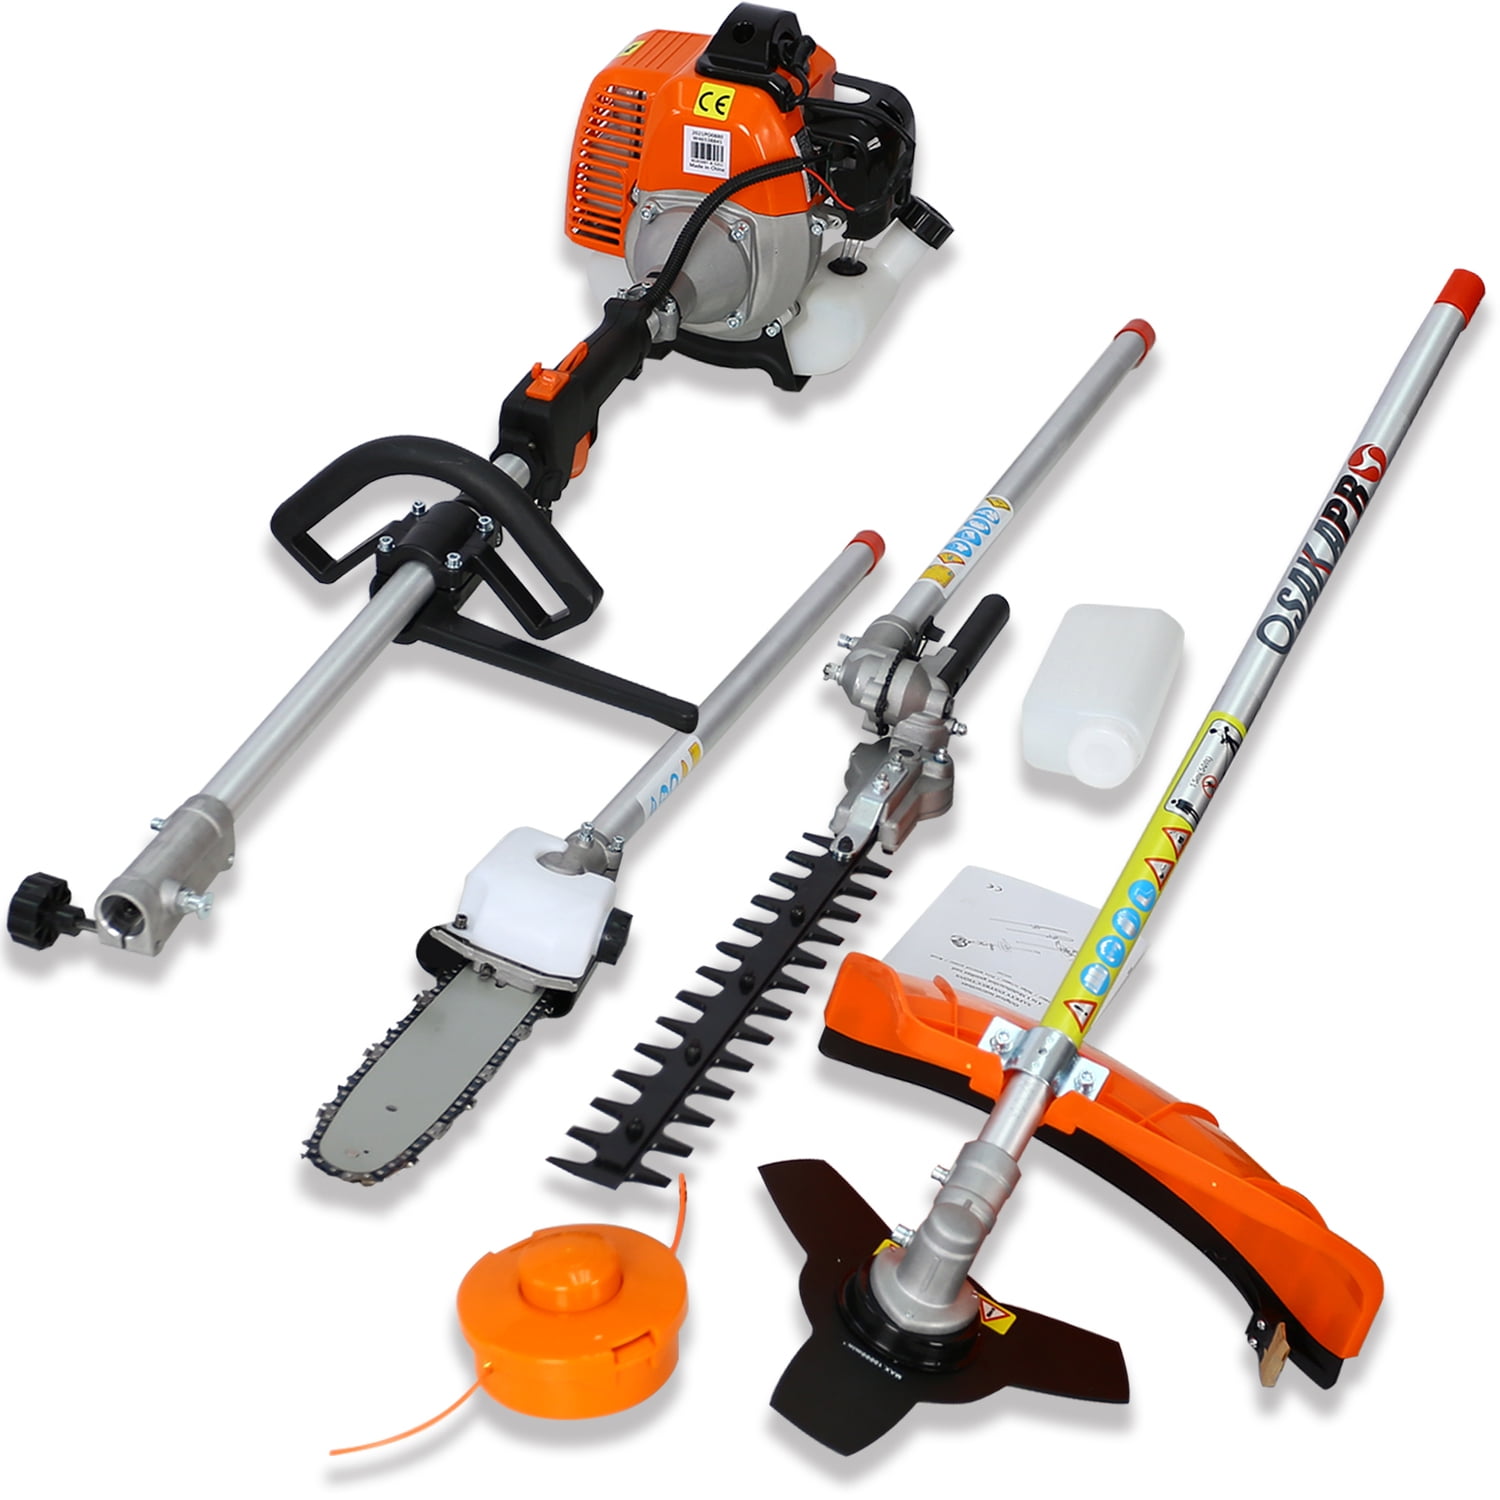 4 in Multi-Functional Trimming Tool, 52CC 2-Cycle Tool System with Gas Pole Hedge Trimmer, Grass Trimmer, and Brush Cutter, Reach to 10FT Garden Combo for Lawn Care - Walmart.com